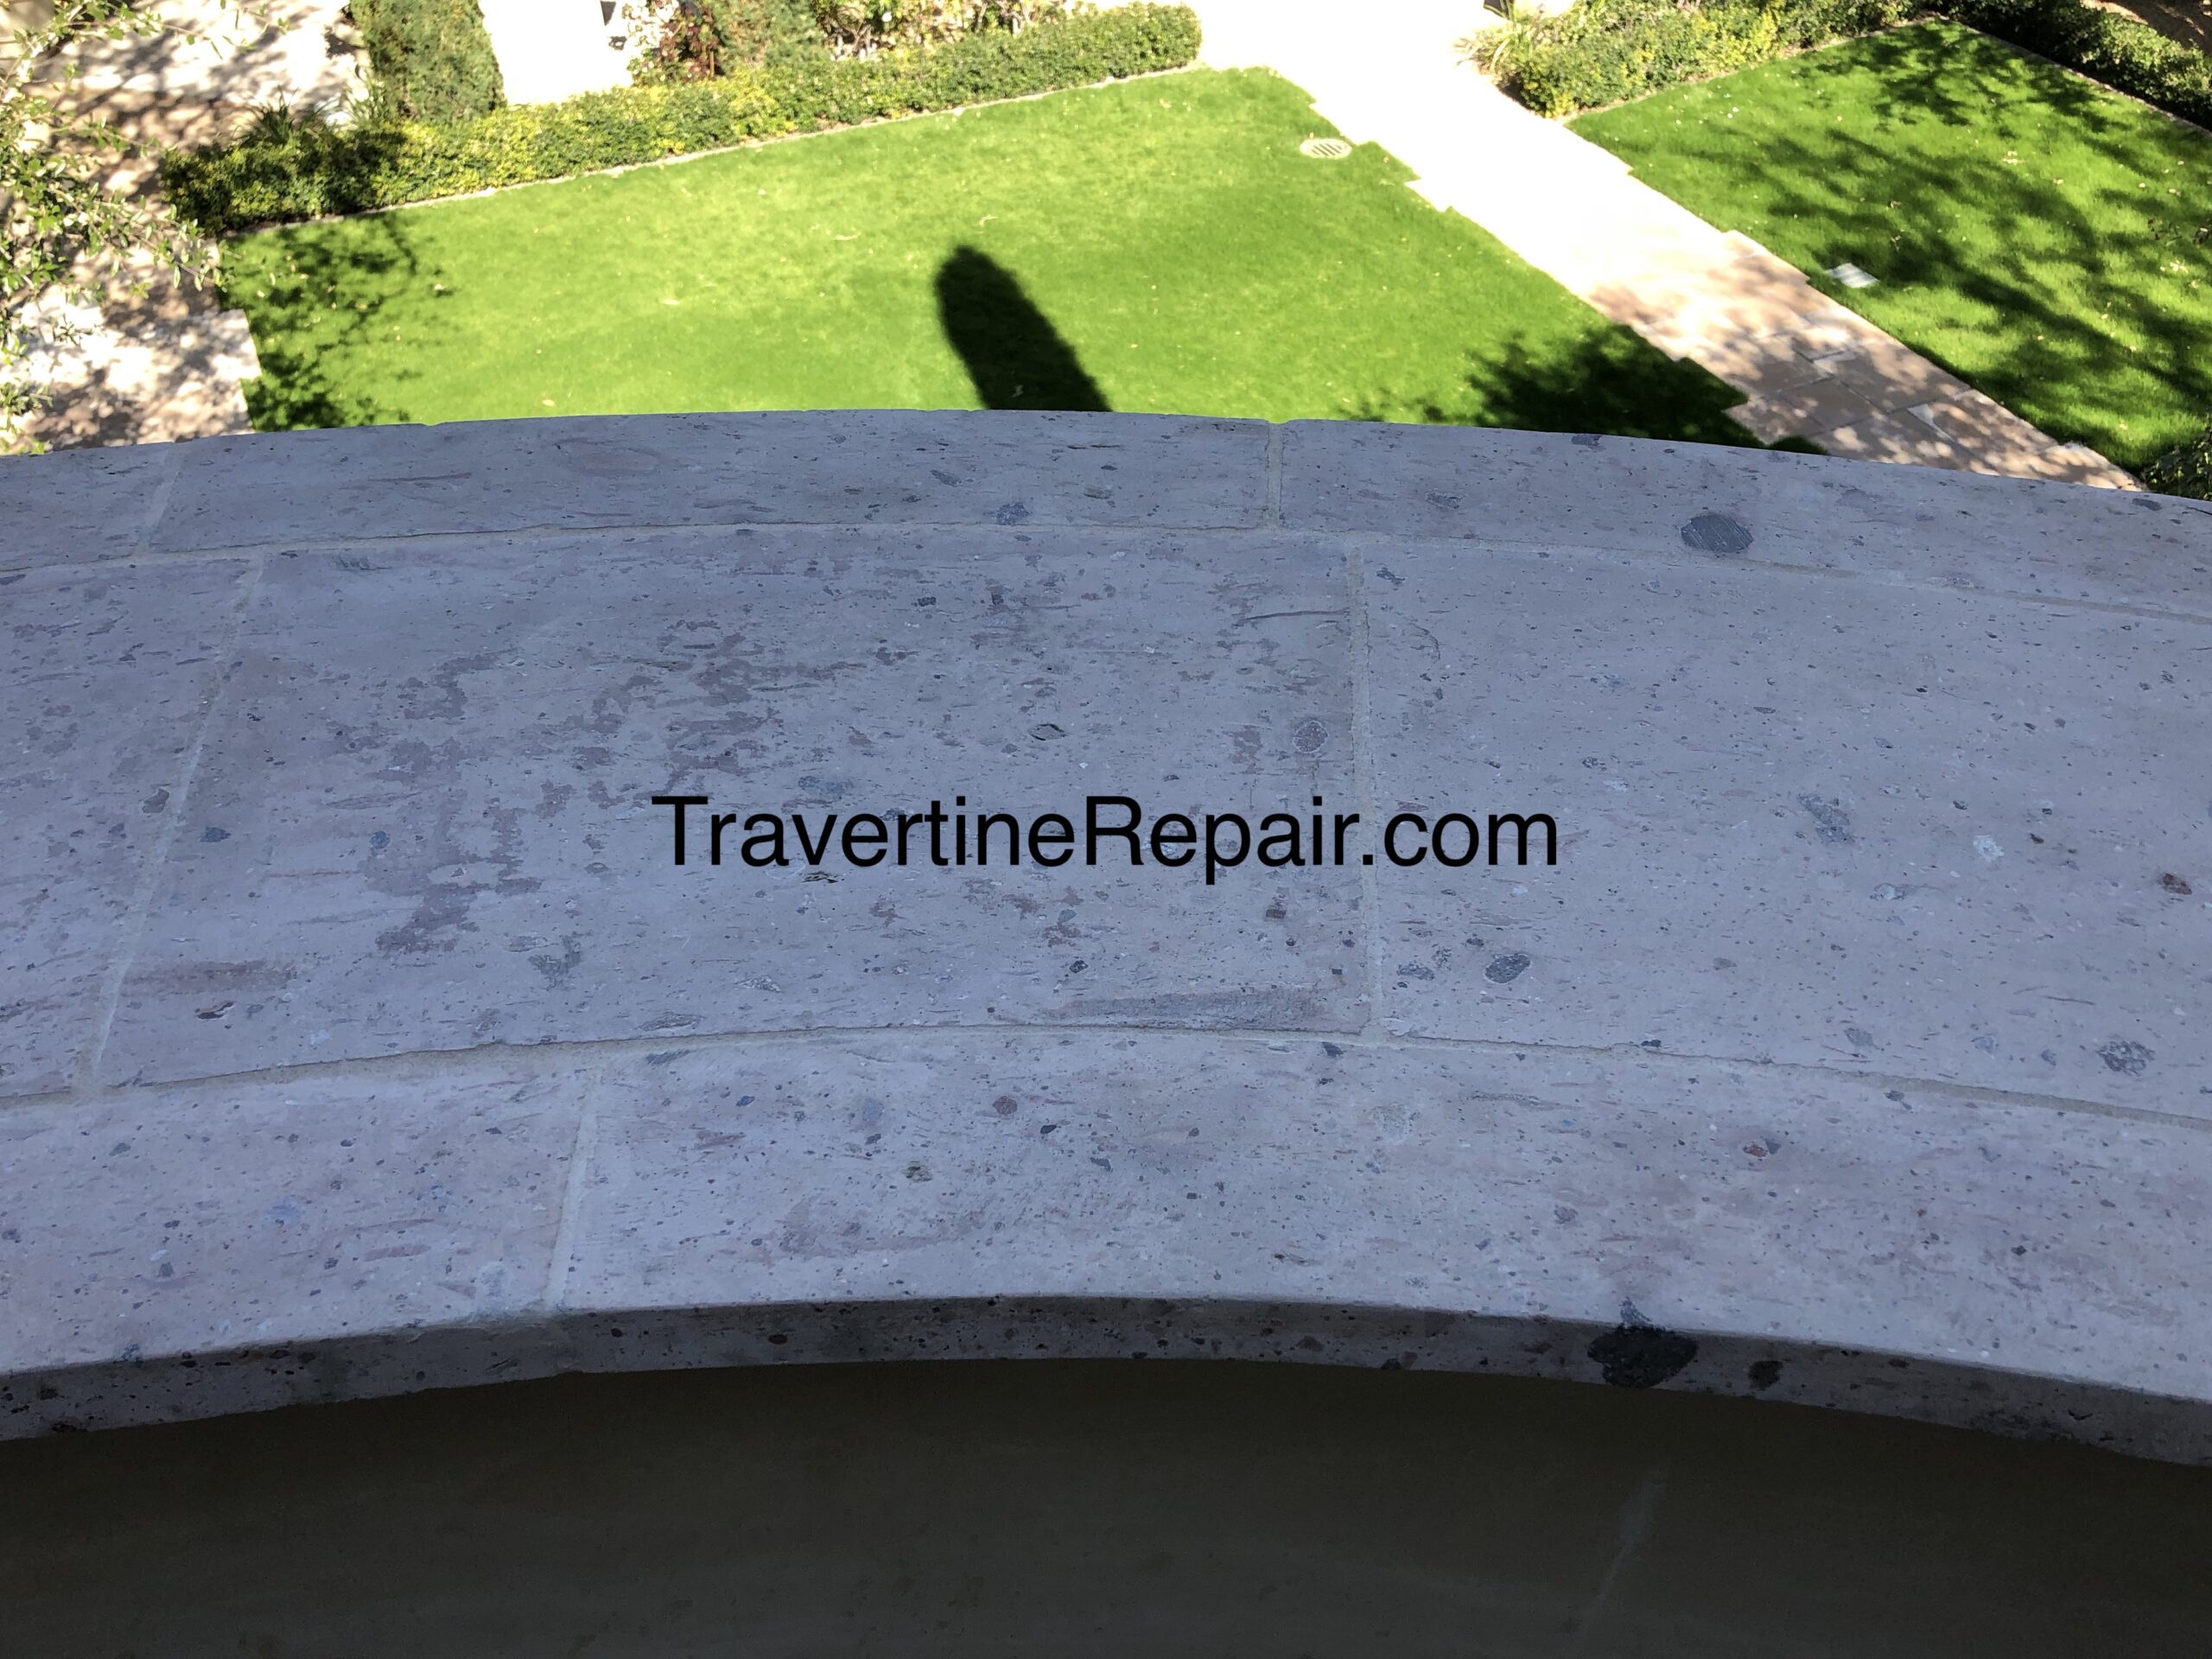 Travertine_Paver_Patio_Grout_Crack_After_Repair